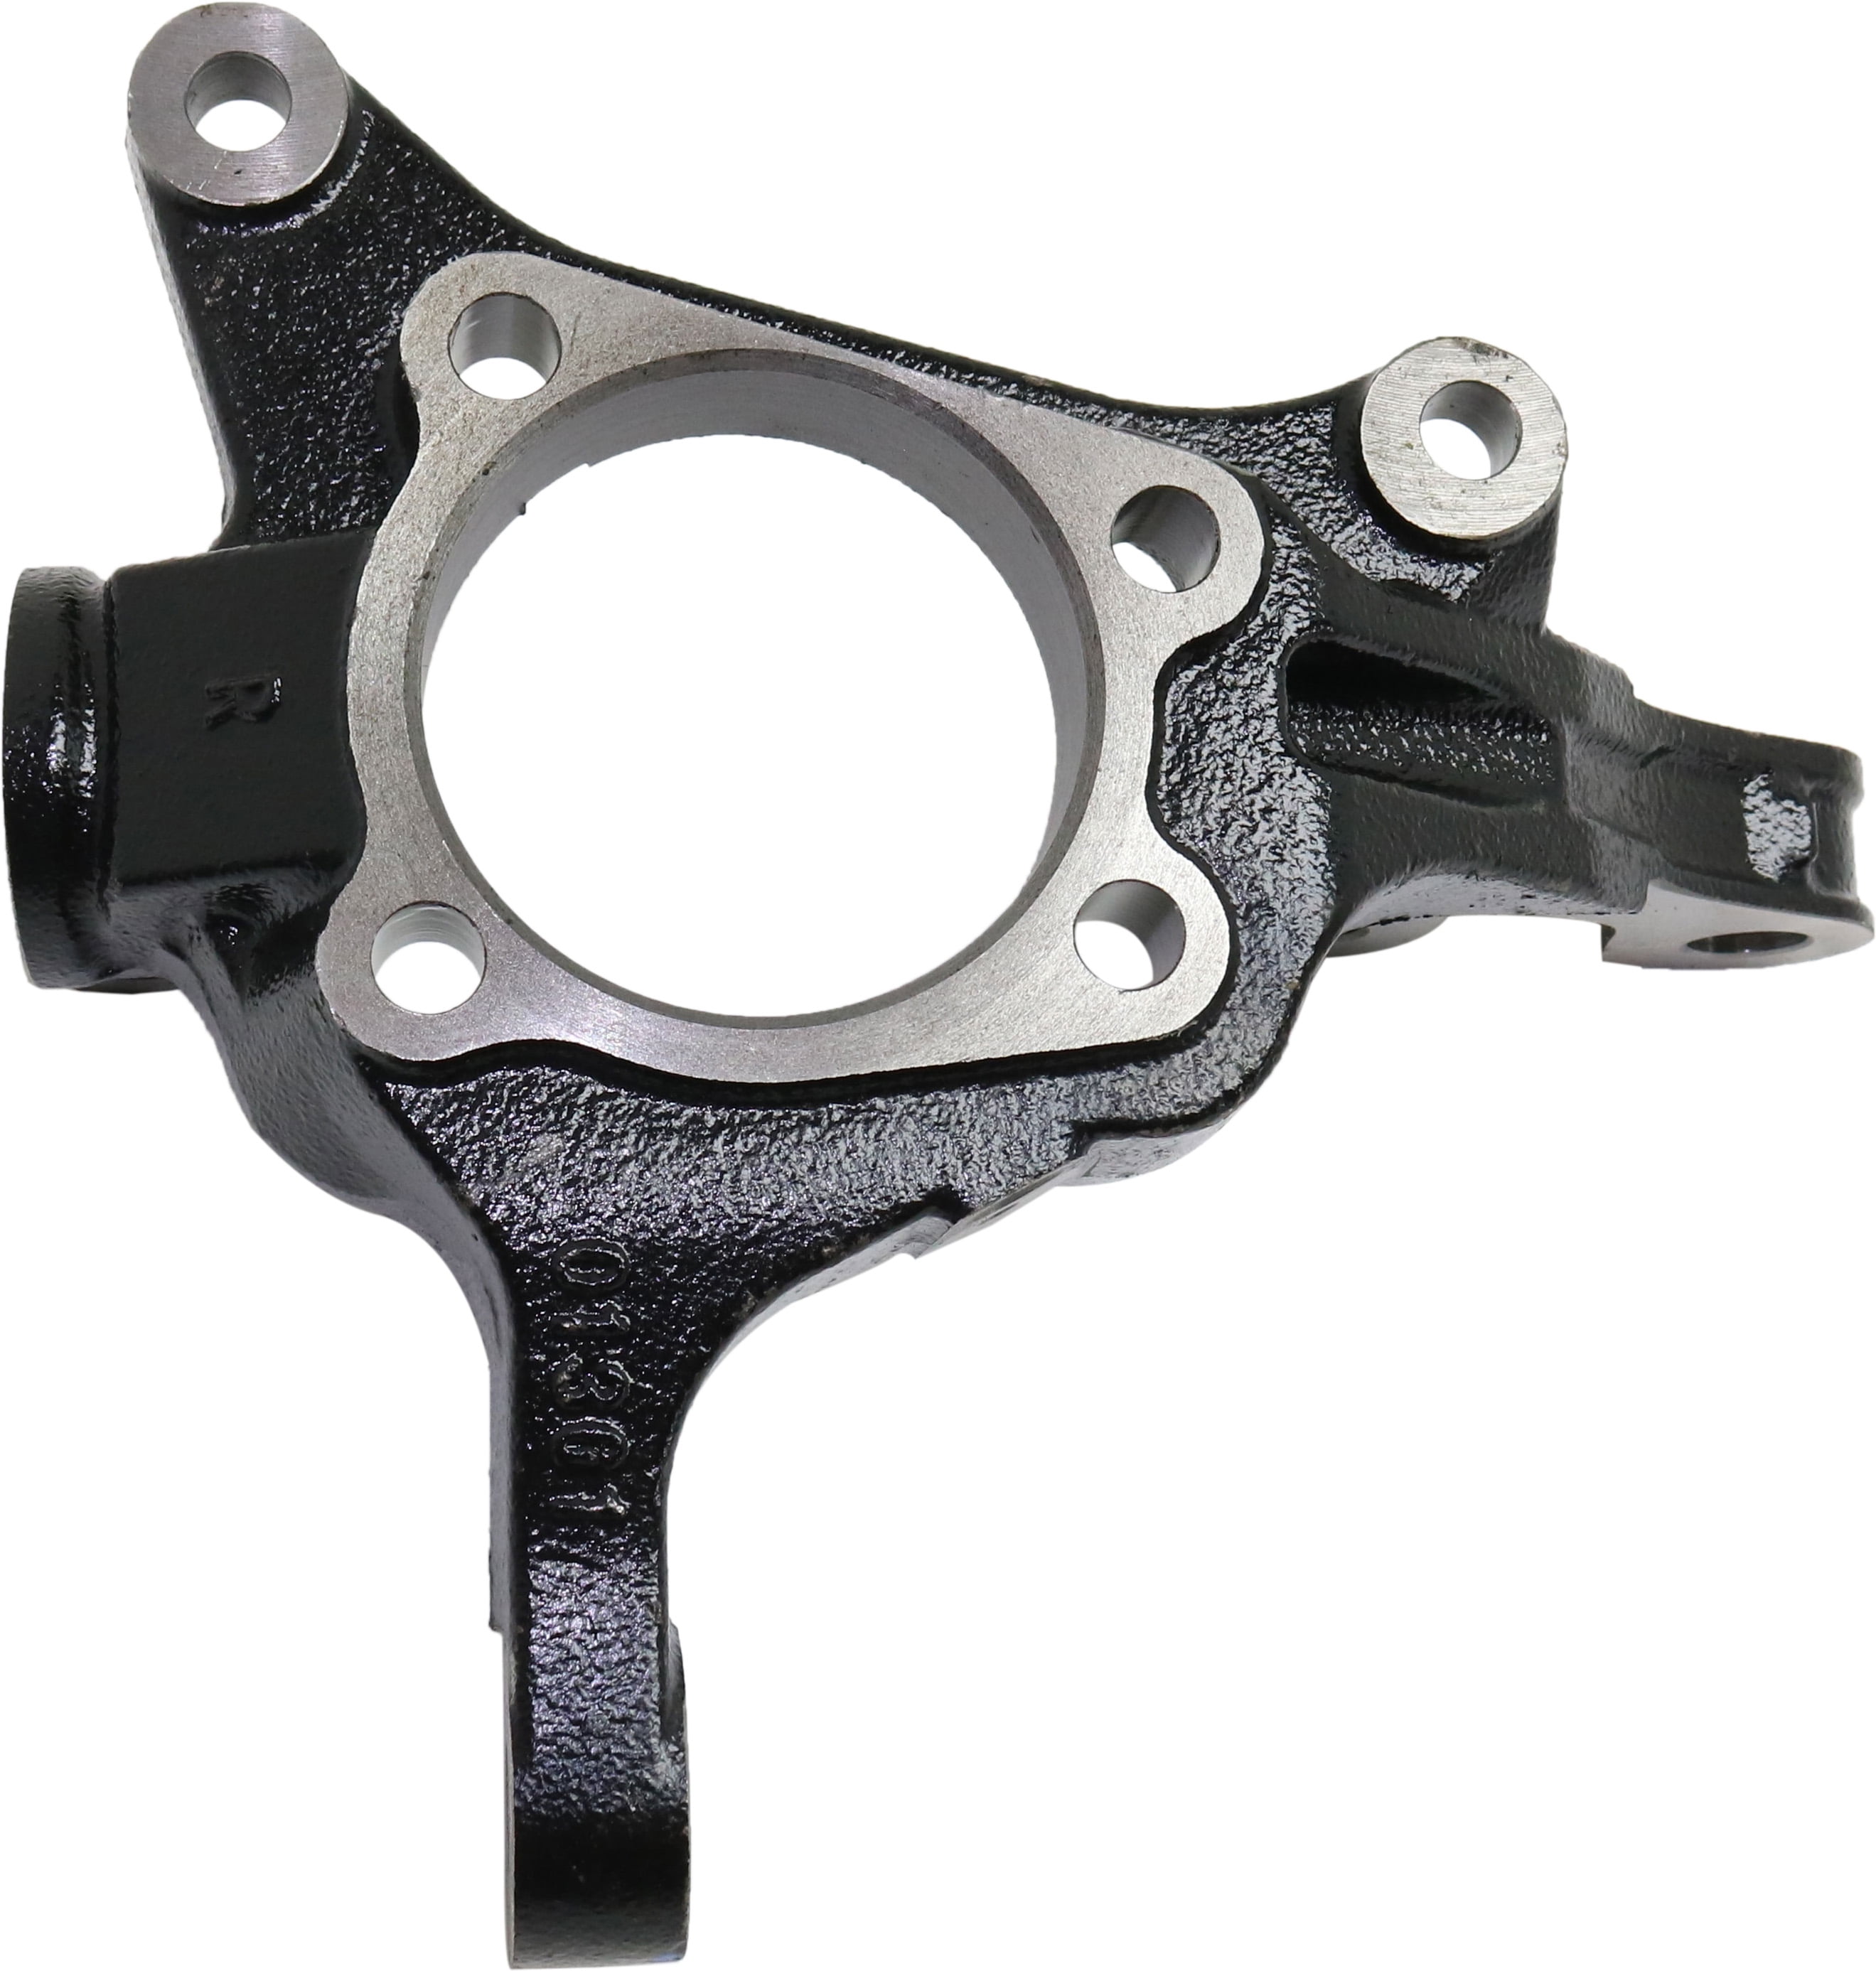 Steering Knuckle Compatible with 2009-2014 Subaru Forester 2011